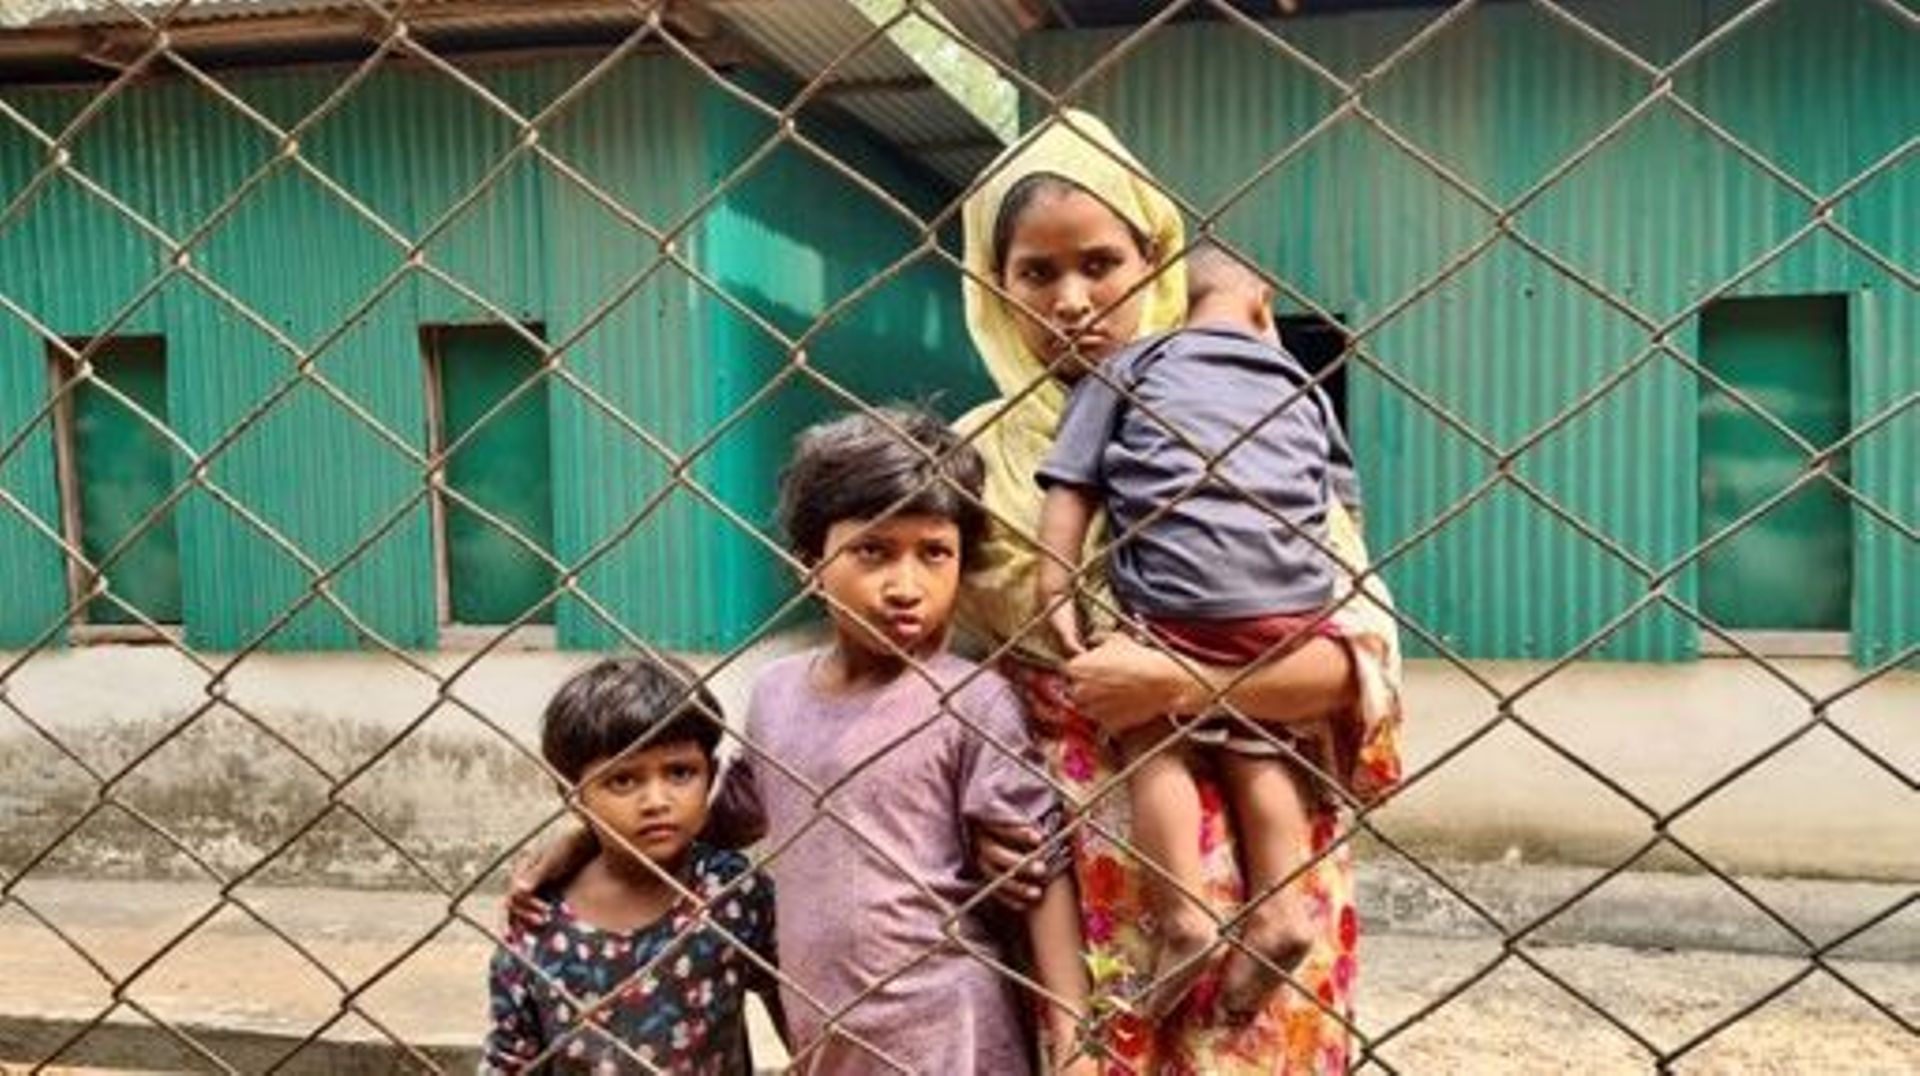 A Rohingya family arrives for a meeting with the Myanmar officials in Teknaf on March 15, 2023. Myanmar officials were meeting with Rohingya refugees on March 15 in what Bangladeshi authorities said was the revival of a long-stalled effort to return the p